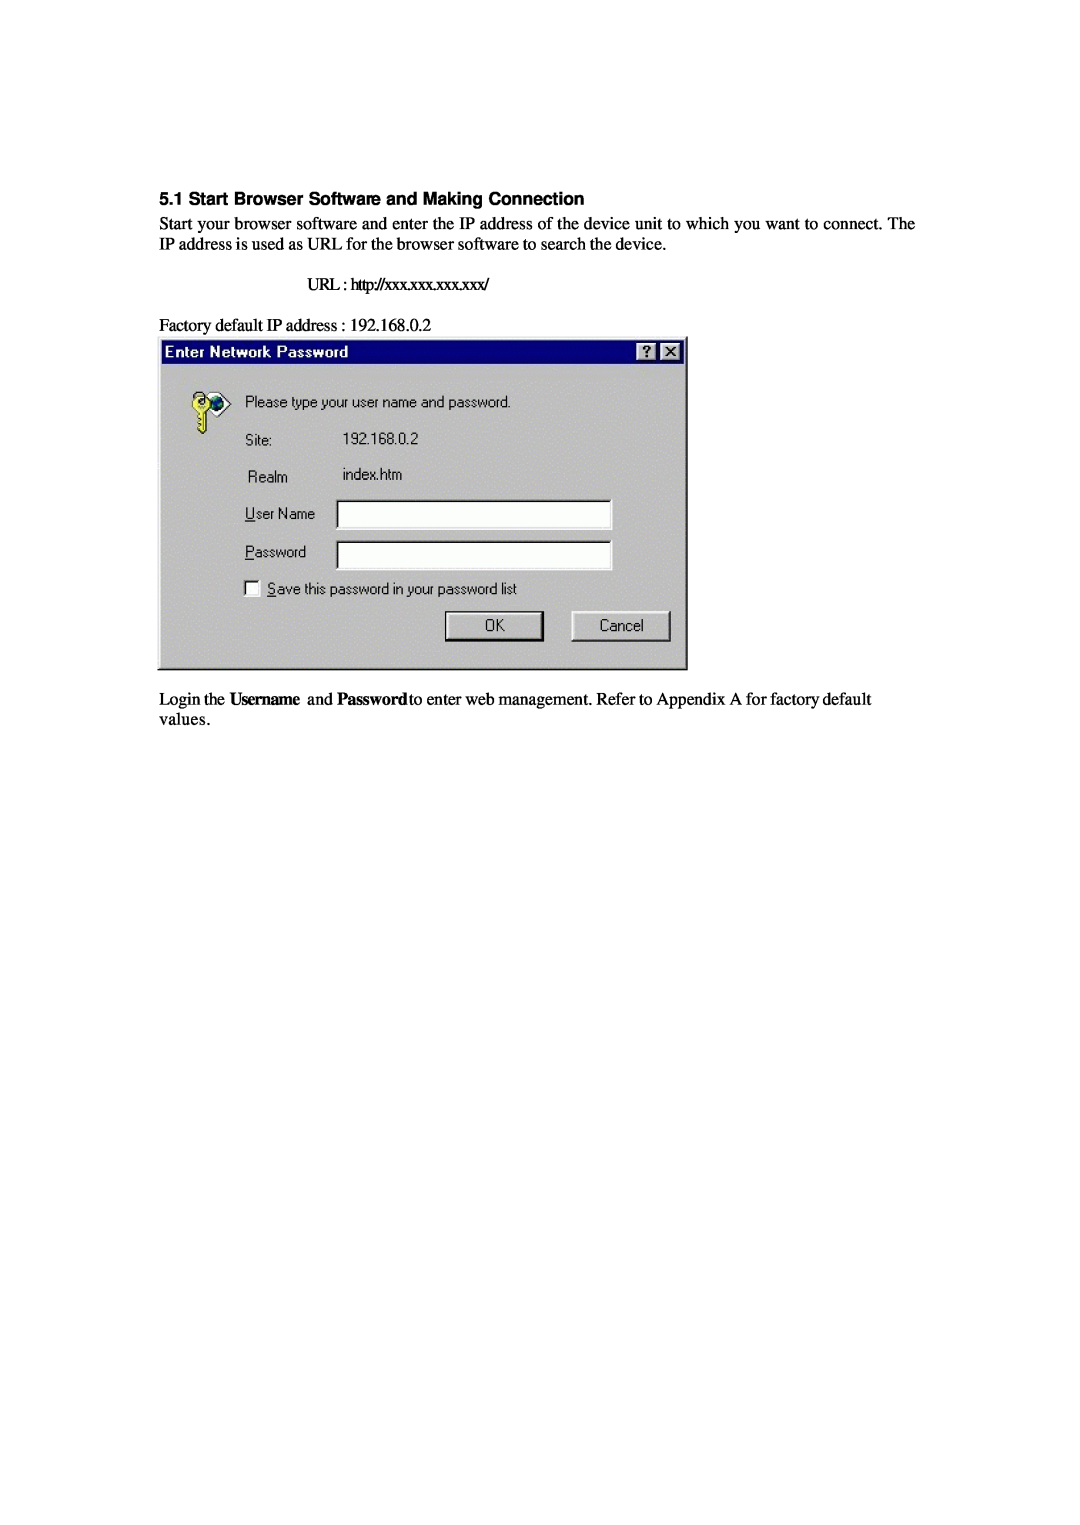 Xerox NS-2260 operation manual Start Browser Software and Making Connection, Factory default IP address 